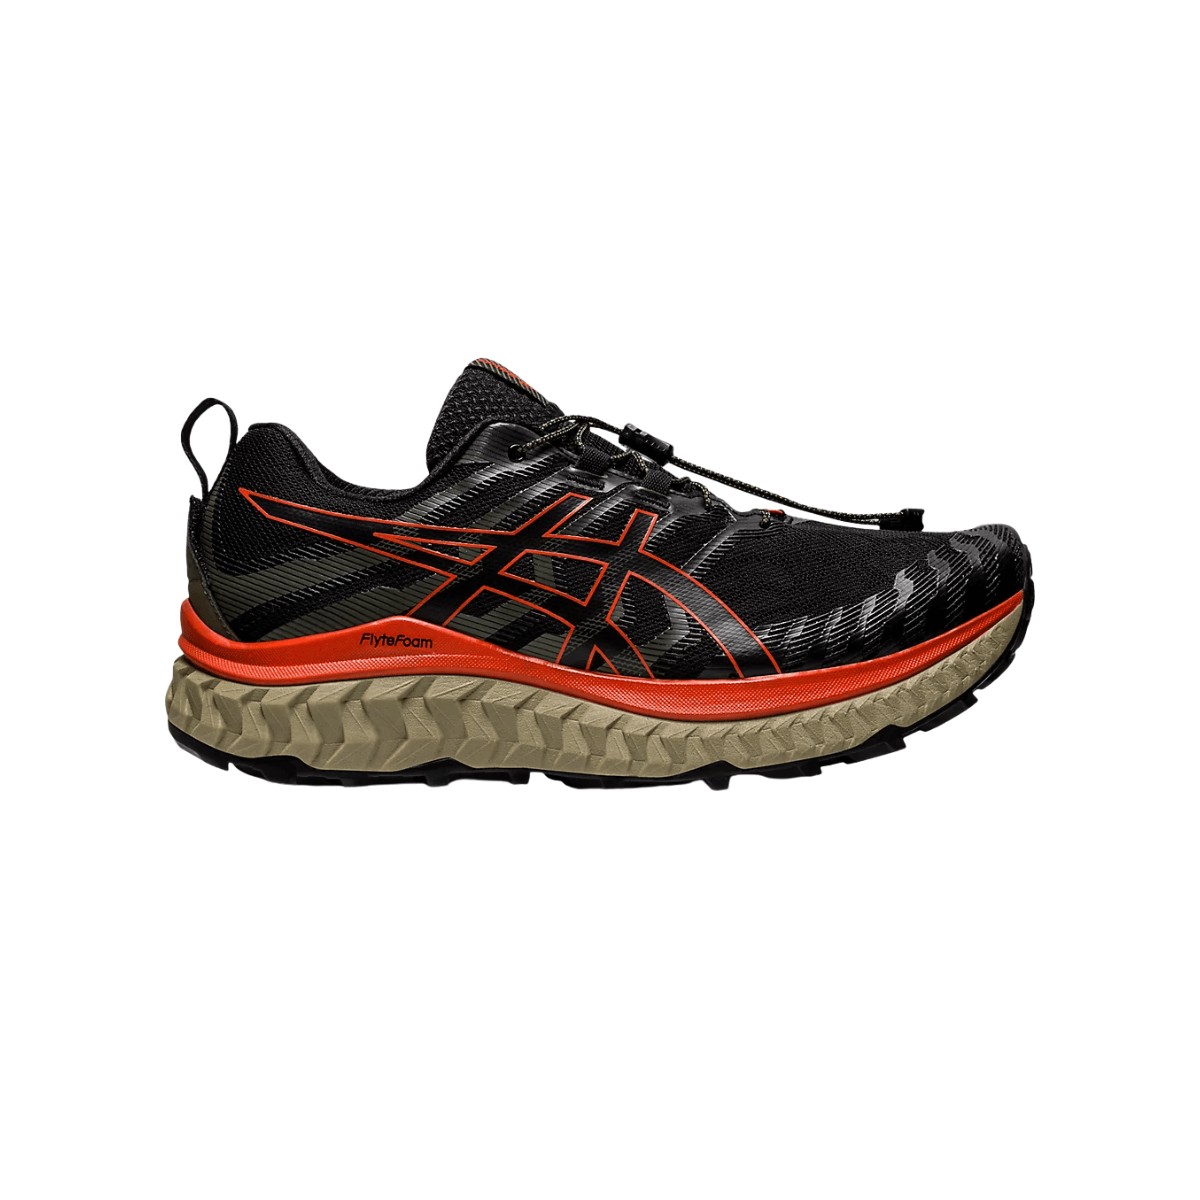 Asics Trabuco Max Black Red Running Shoes AW22, Size 42 - EUR